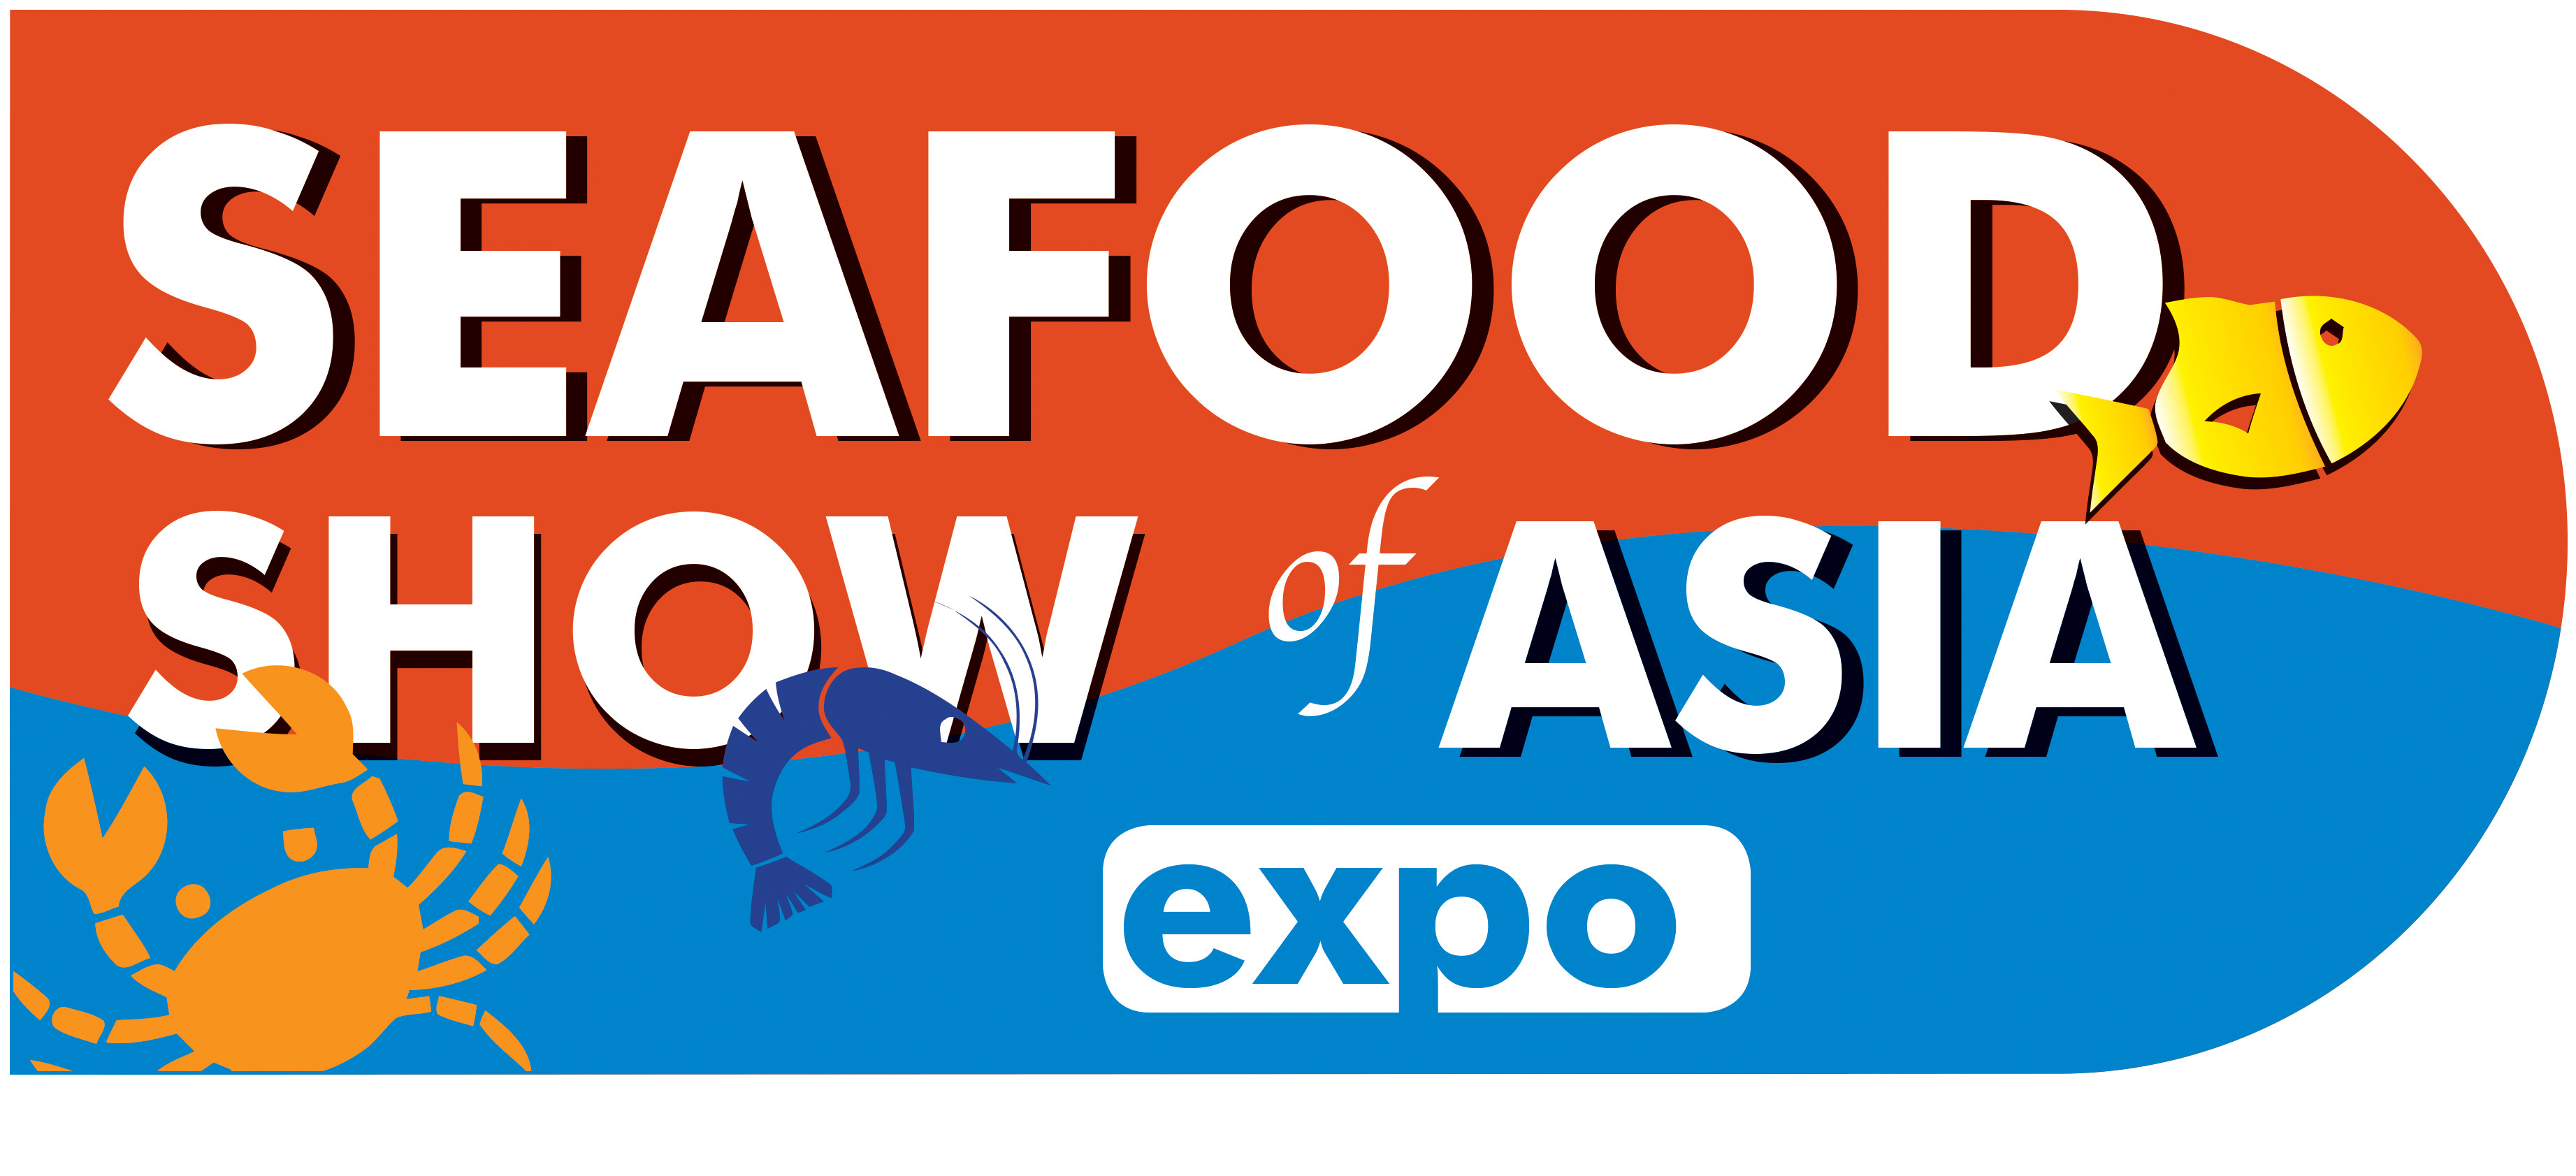 SEAFOOD SHOW ASIA EXPO Homepage